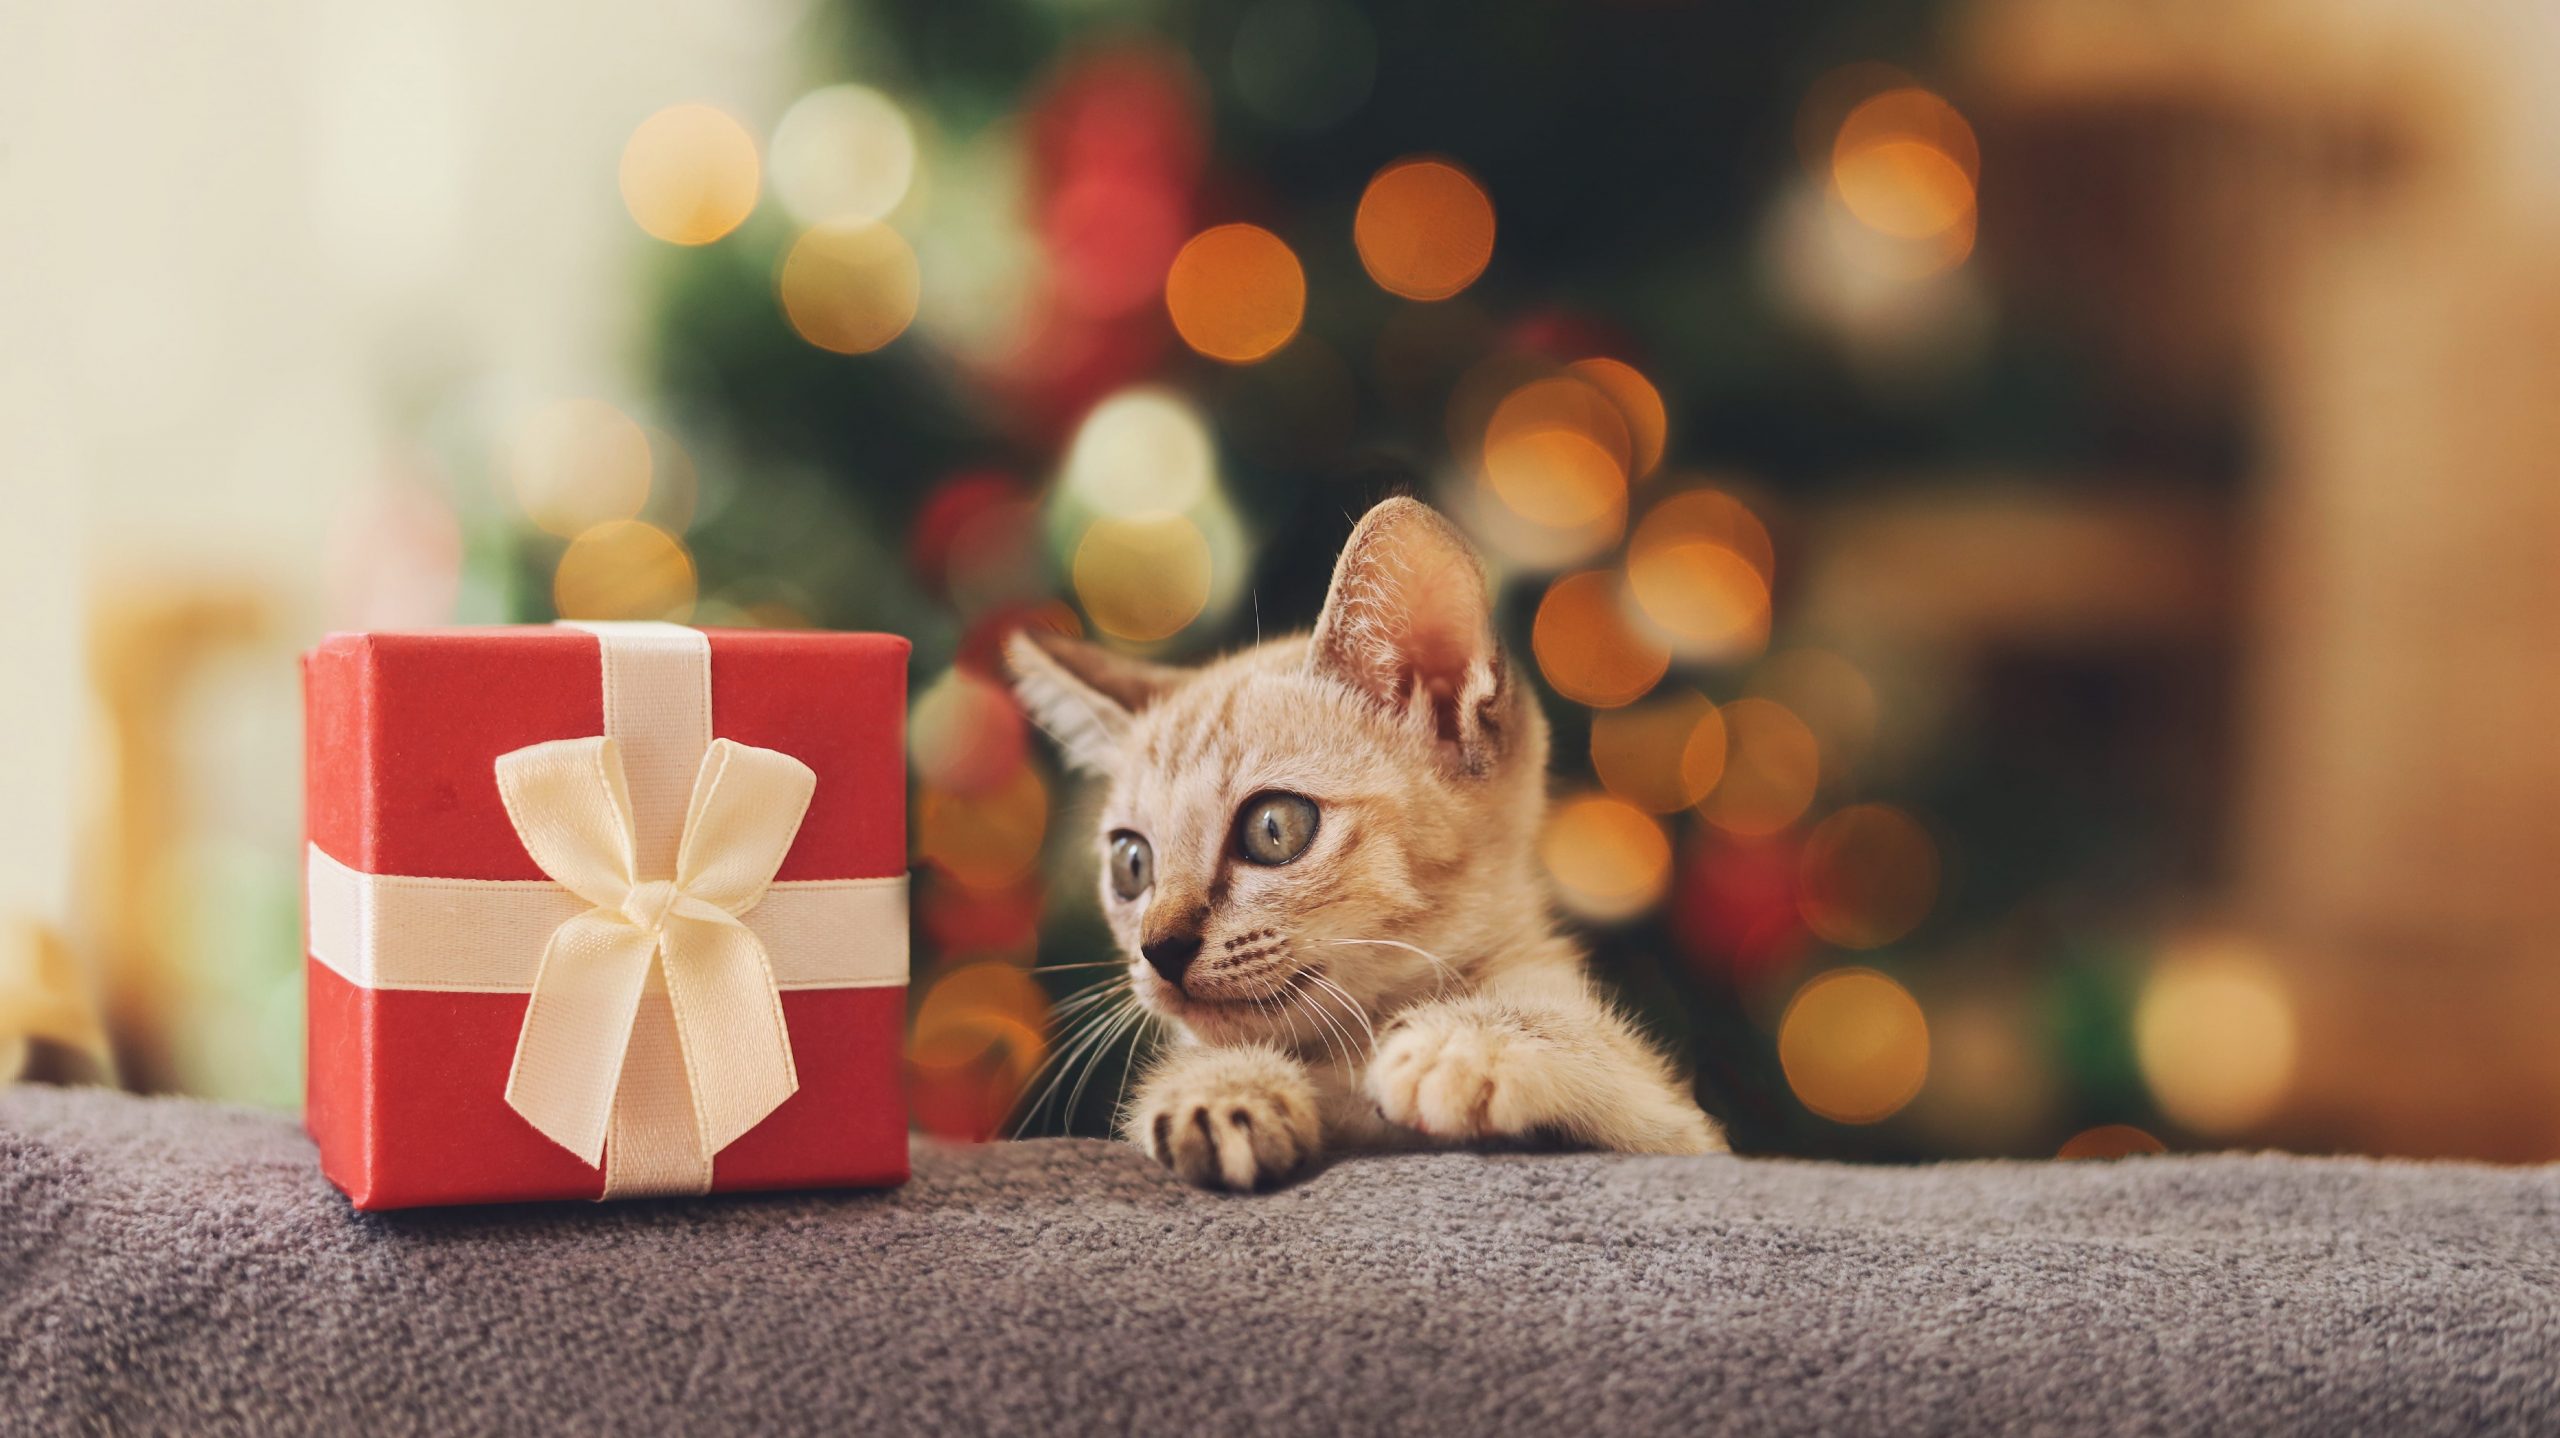 Best Gifts for Your Cats This Holiday Season